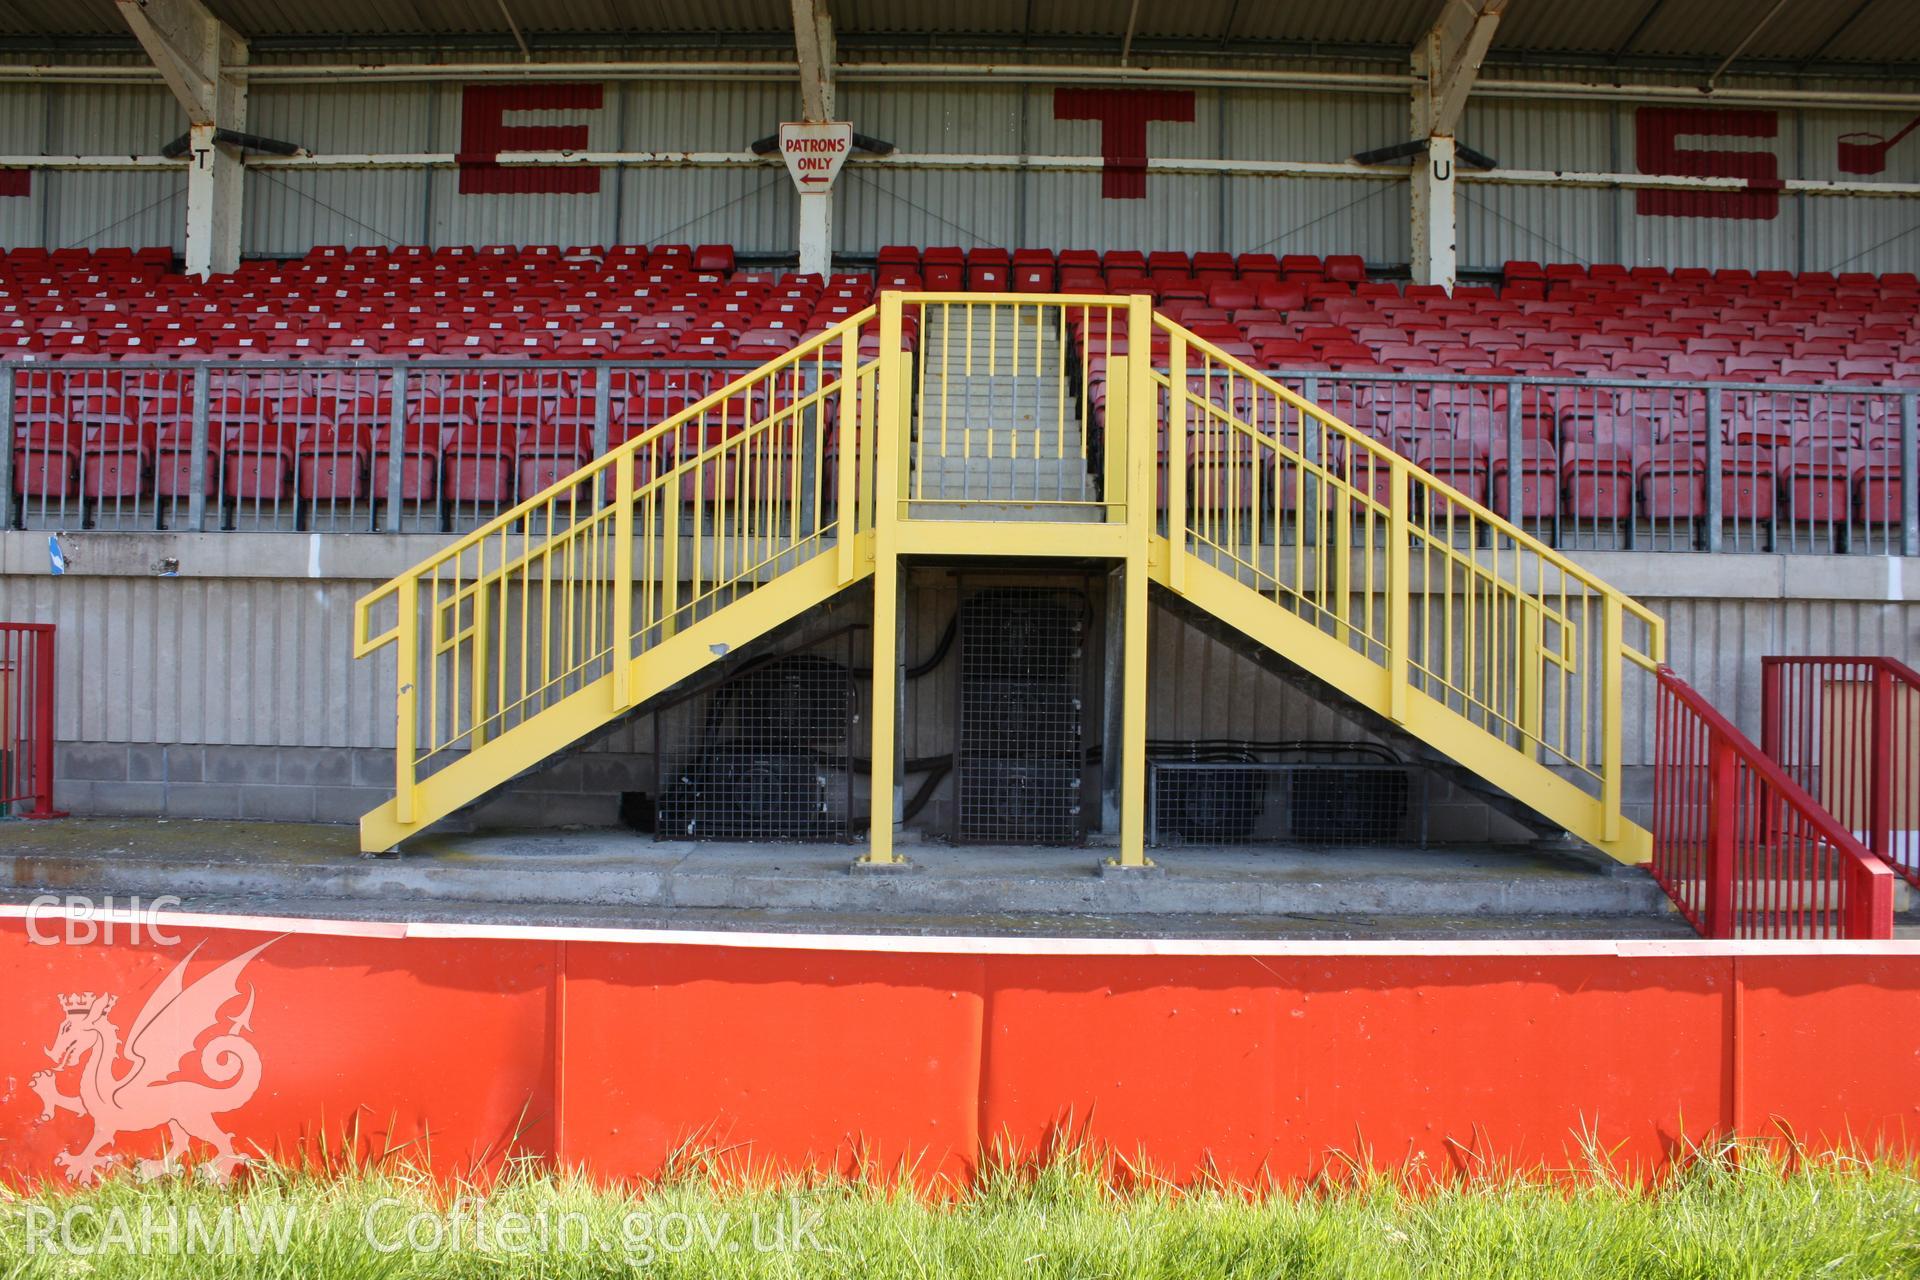 North stand, stairs to upper level